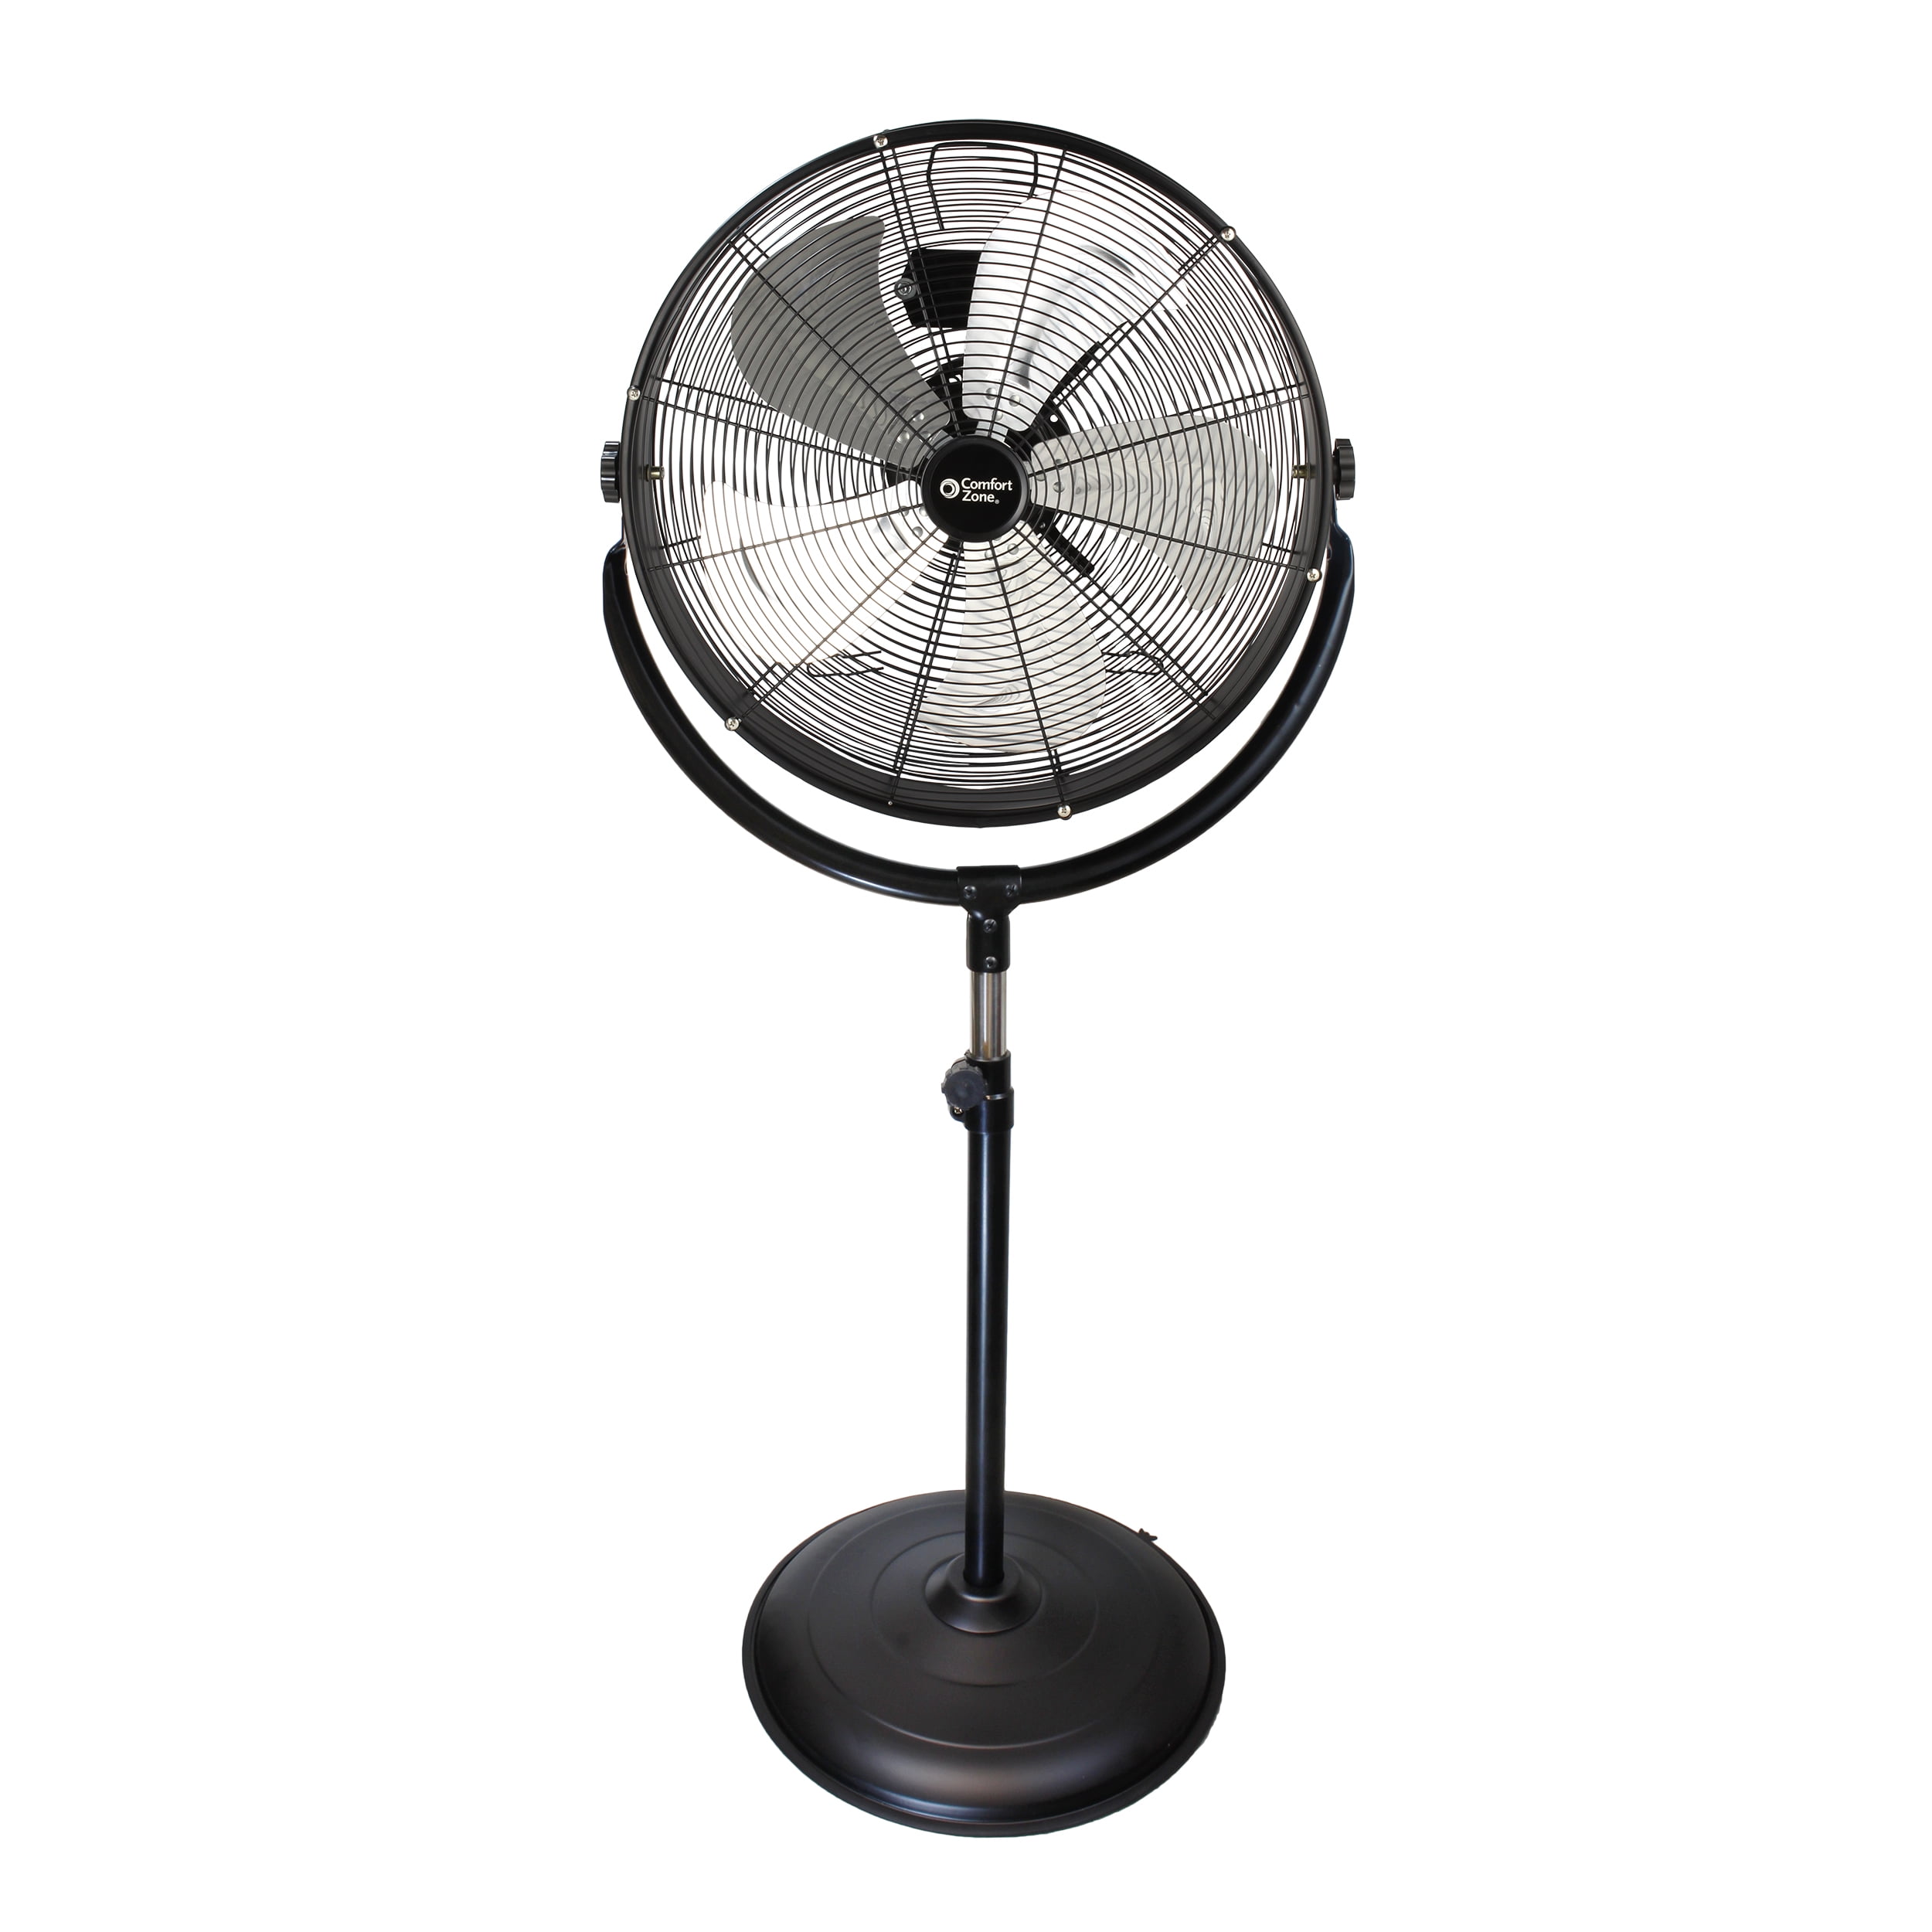 48" Adjustable 3-Speed Double Blade Pedestal Electric Stand Fan Cooling Black 